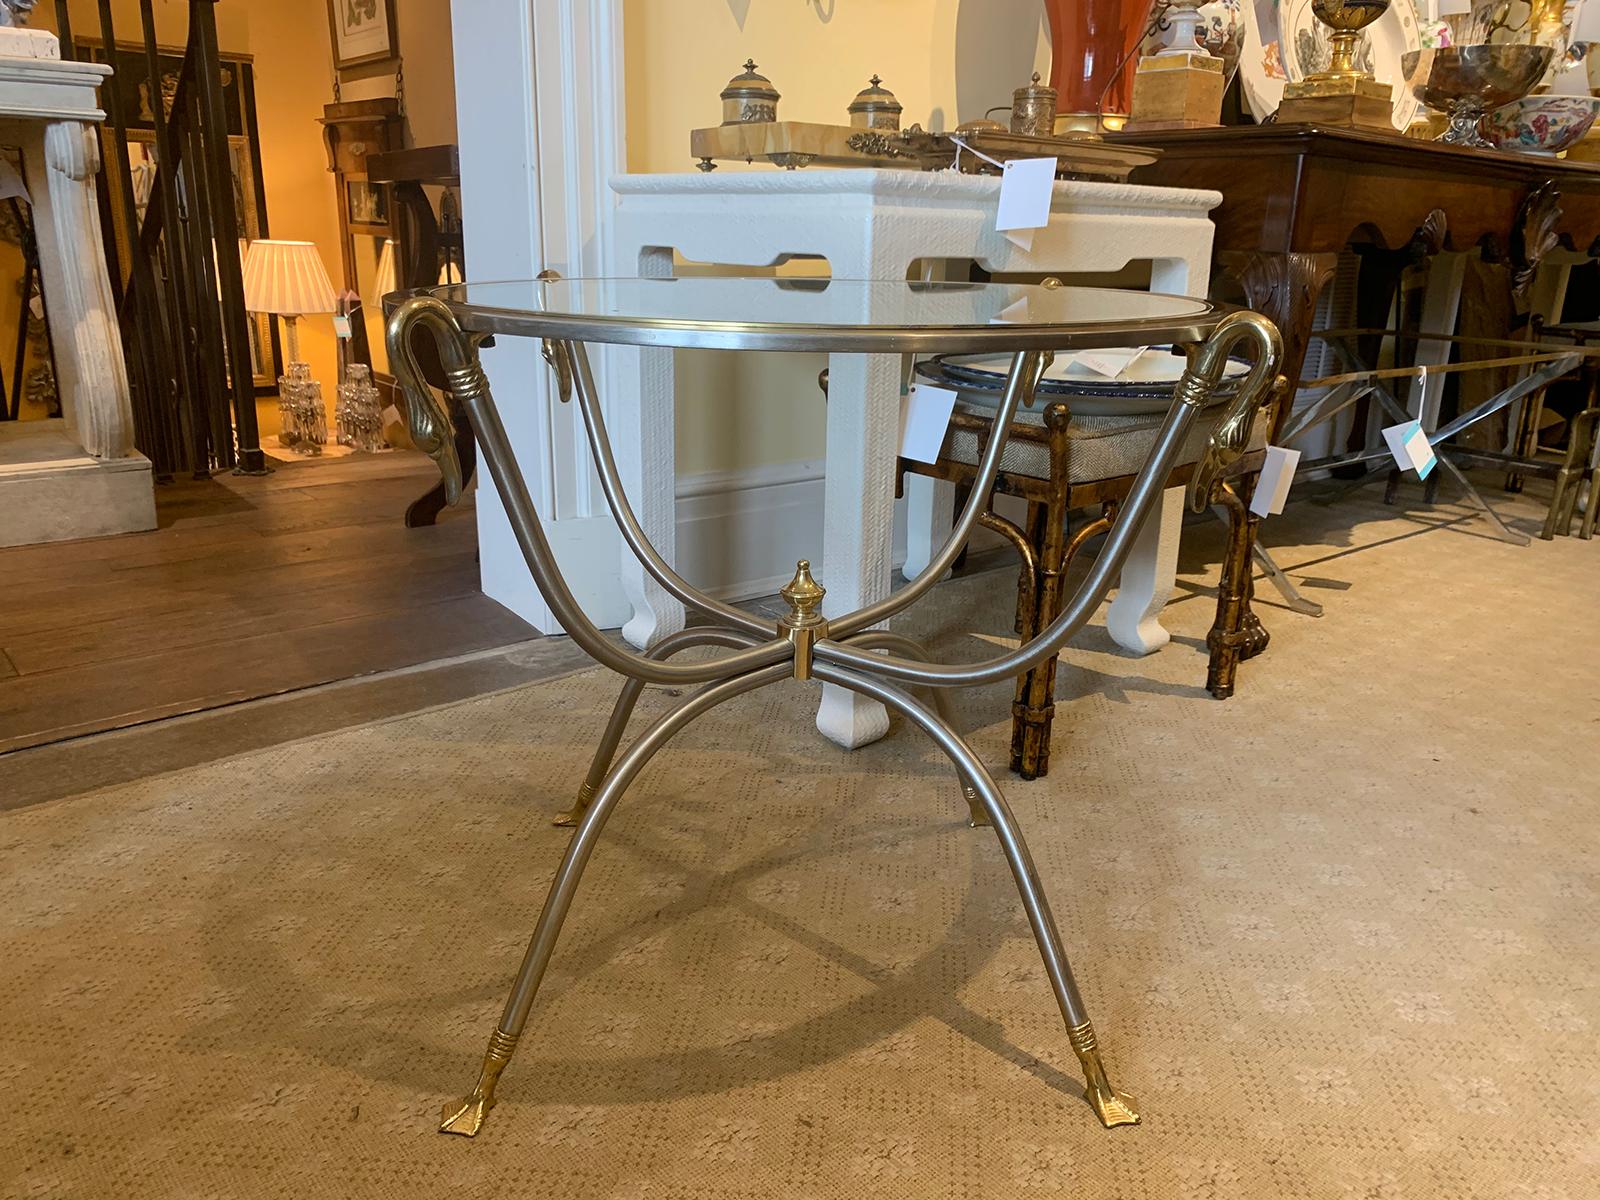 Mid-20th century steel and brass gueridon glass top table, ducks heads and feet.